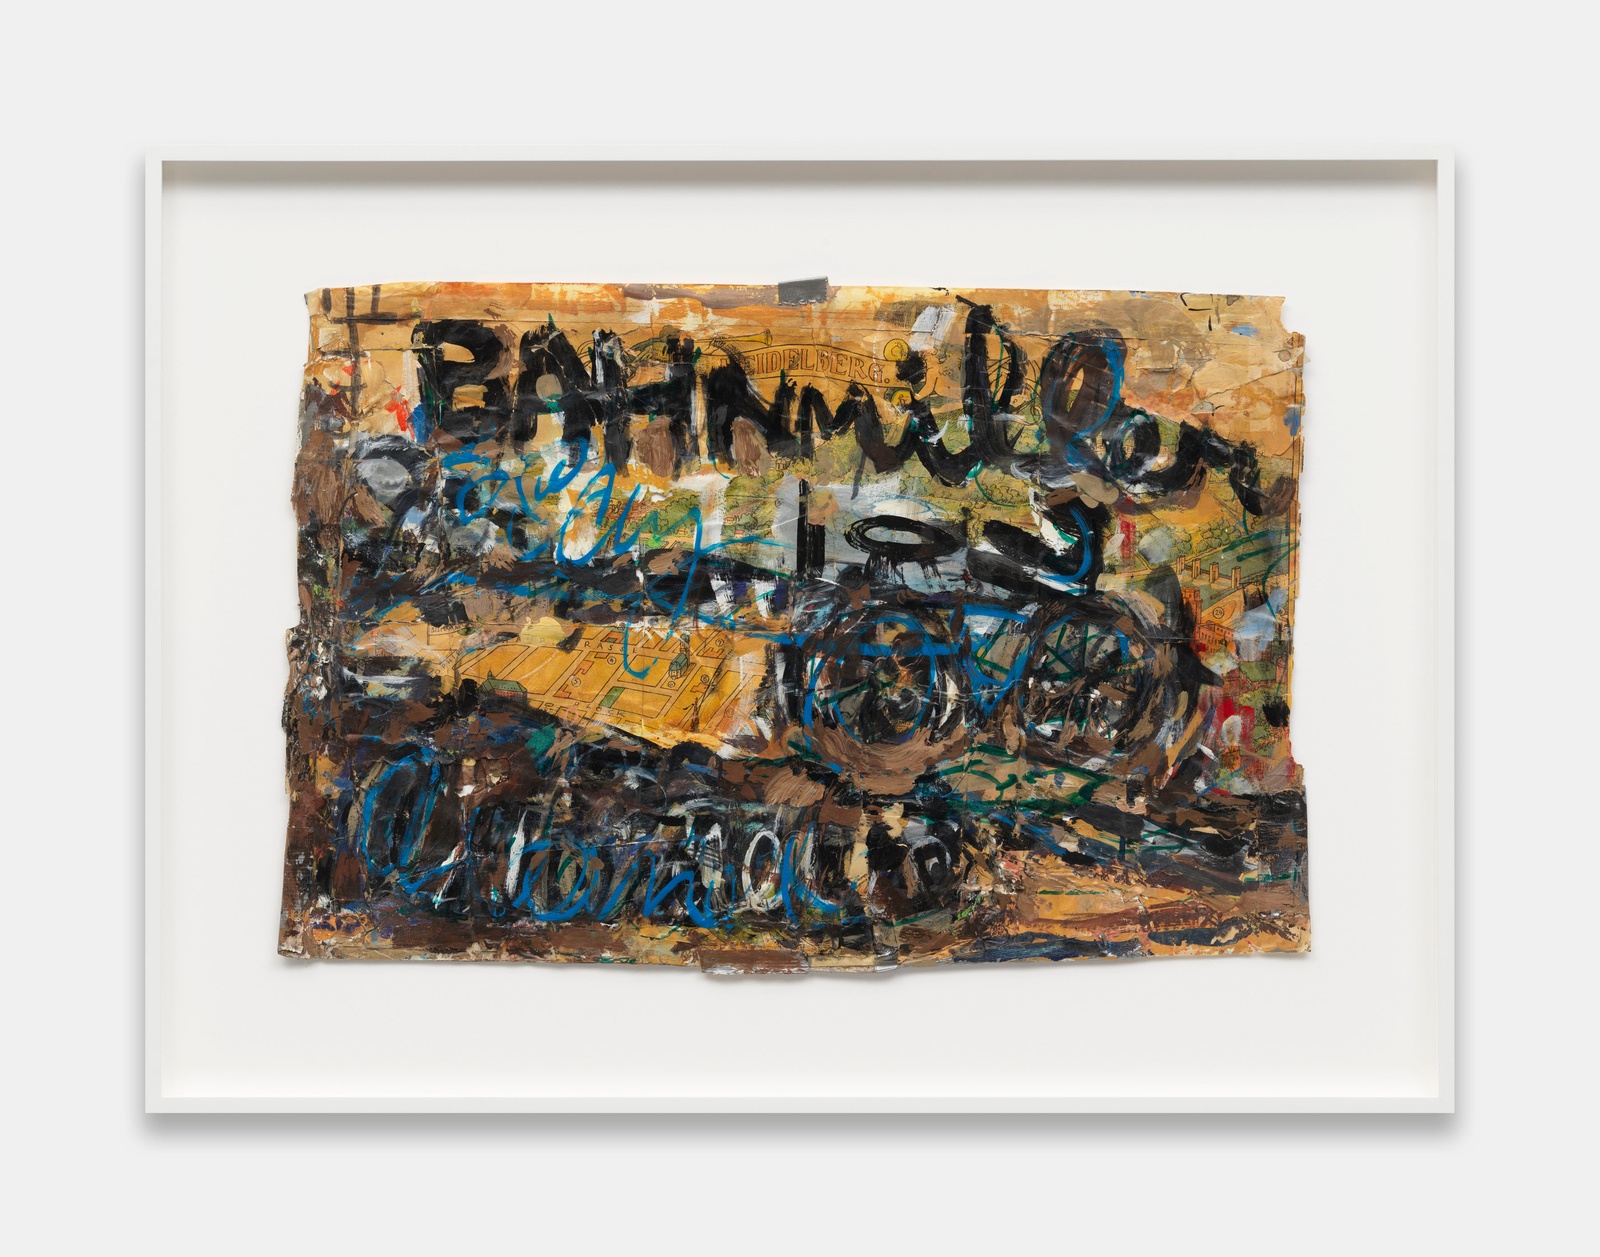 Cay BahnmillerUntitled, 1997Oil, latex, adhesive tape, marker, varnish on paper41.3 x 61.3 cm (16 1/4 x 24 1/4 inches) 